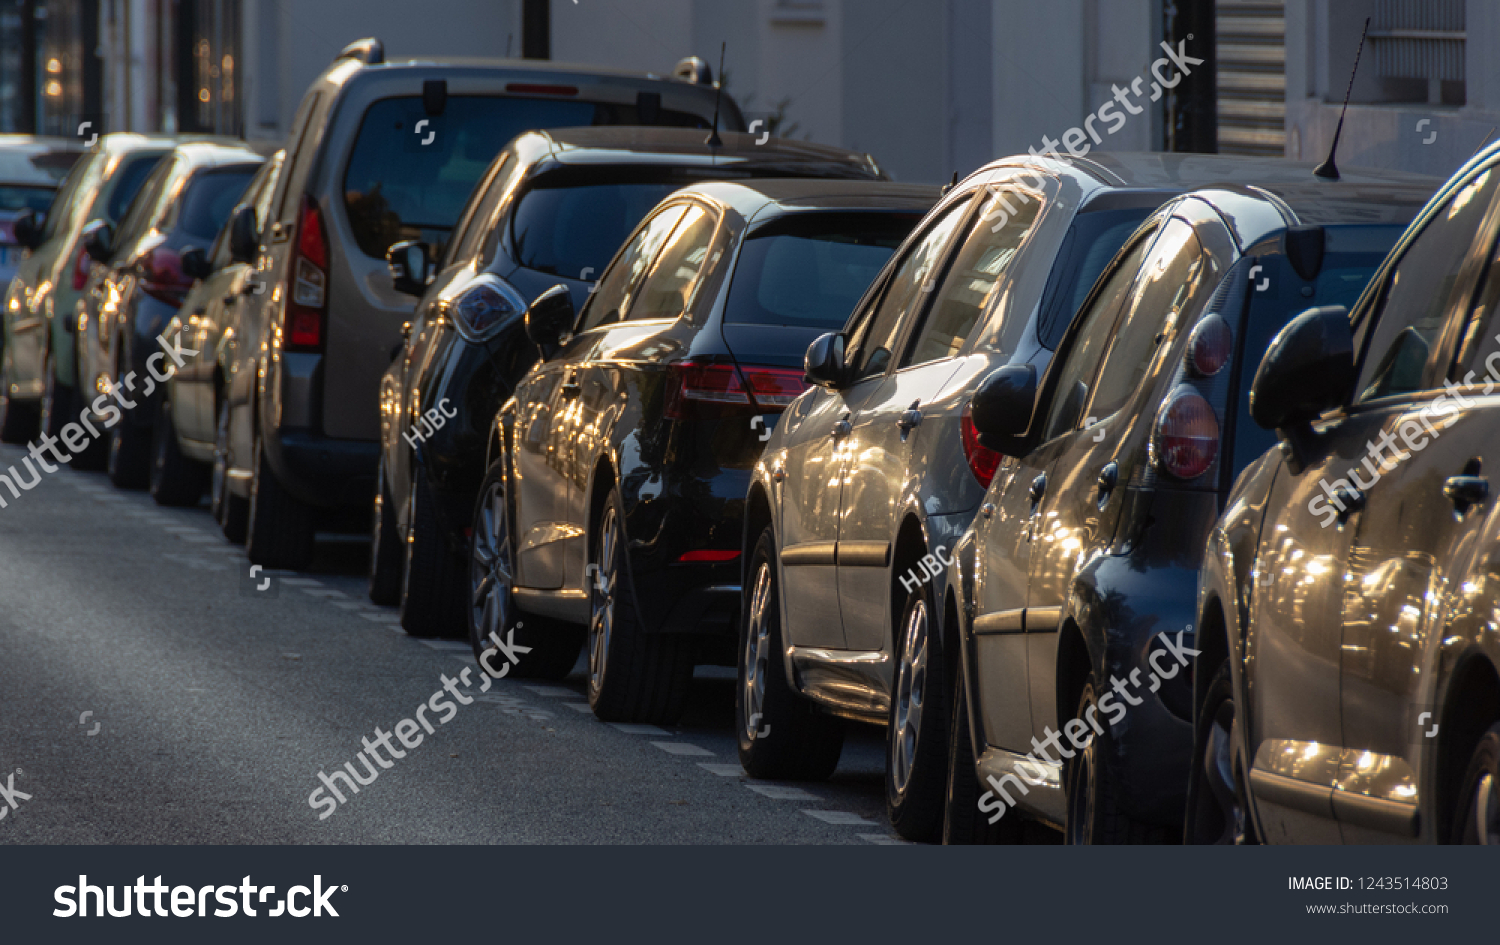 Cars parked along a street at sunset #1243514803